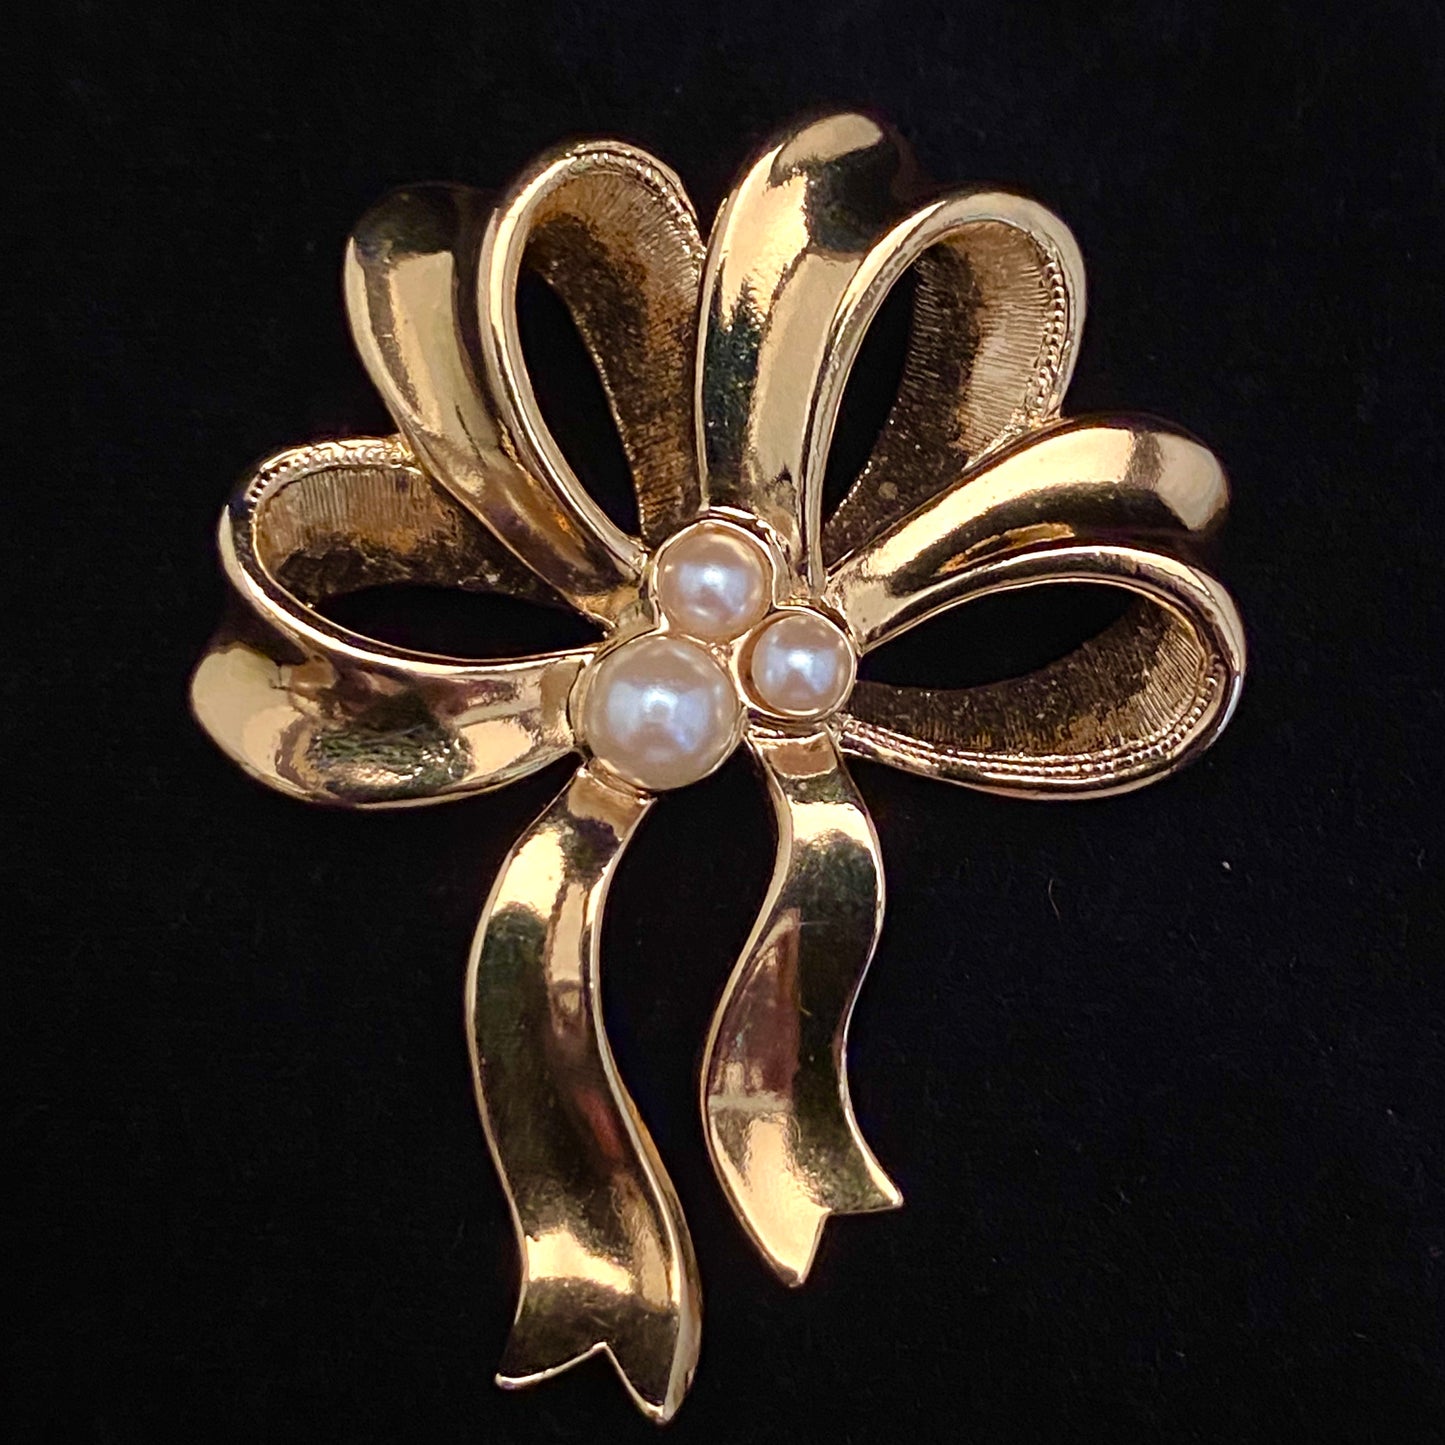 1995 Avon Pearly Bow Brooch